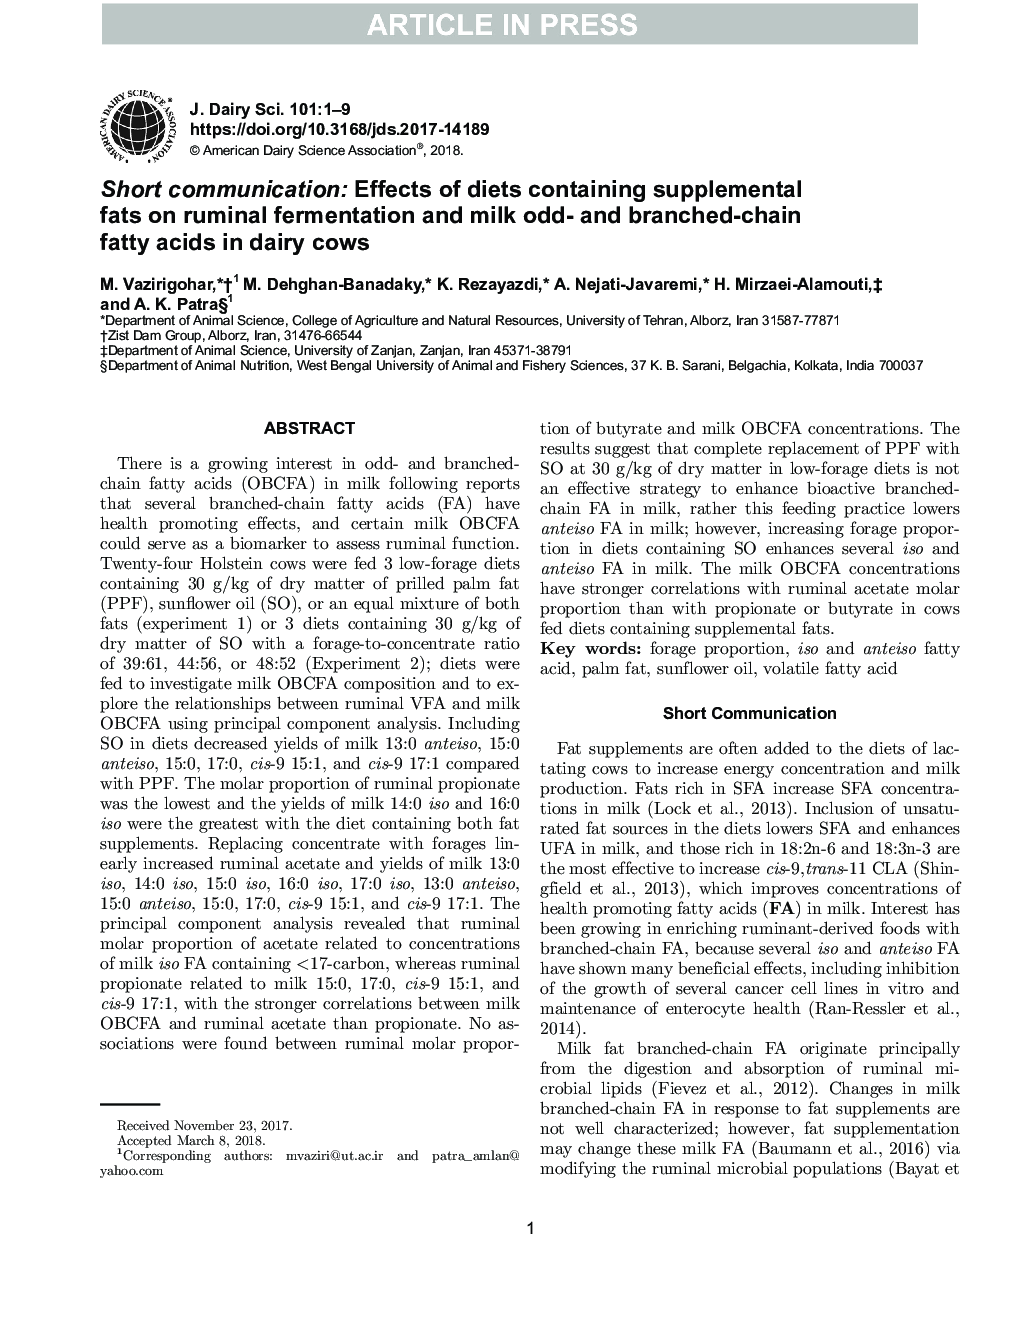 Short communication: Effects of diets containing supplemental fats on ruminal fermentation and milk odd- and branched-chain fatty acids in dairy cows